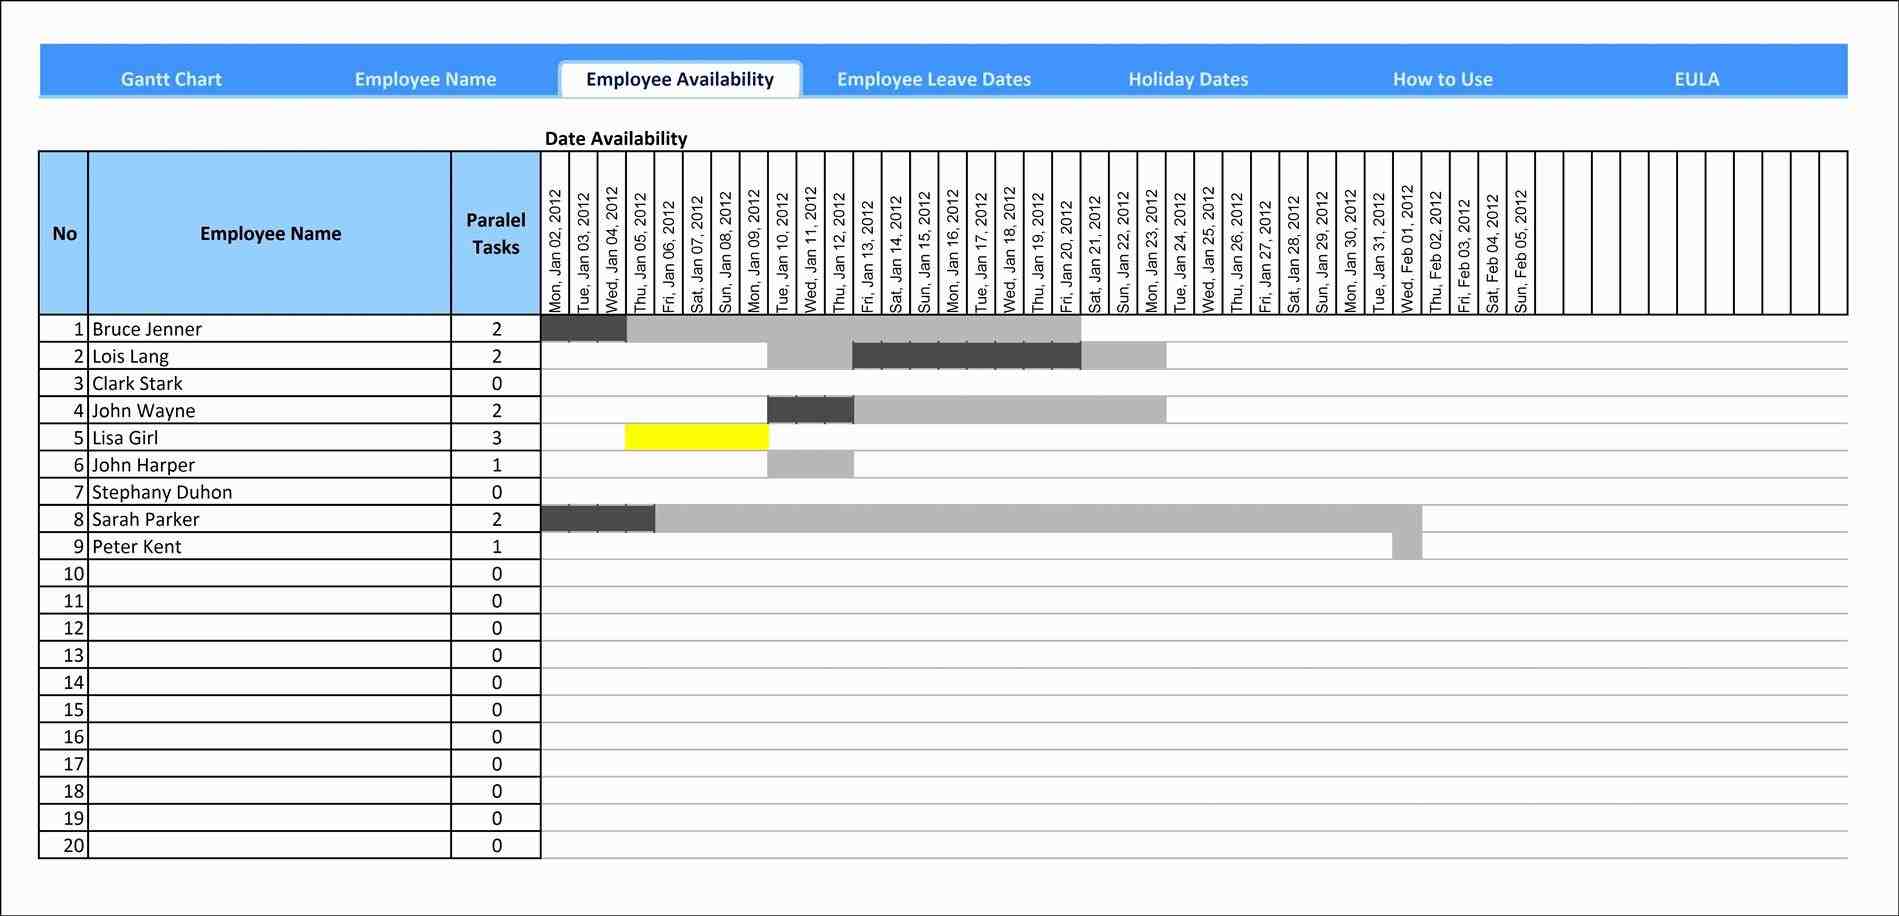 rhdraakjedesigncom diagram Free Download Gantt Chart Template For Excel gantt awesome free download chart template choice rhdraakjedesigncom excel image collections templates